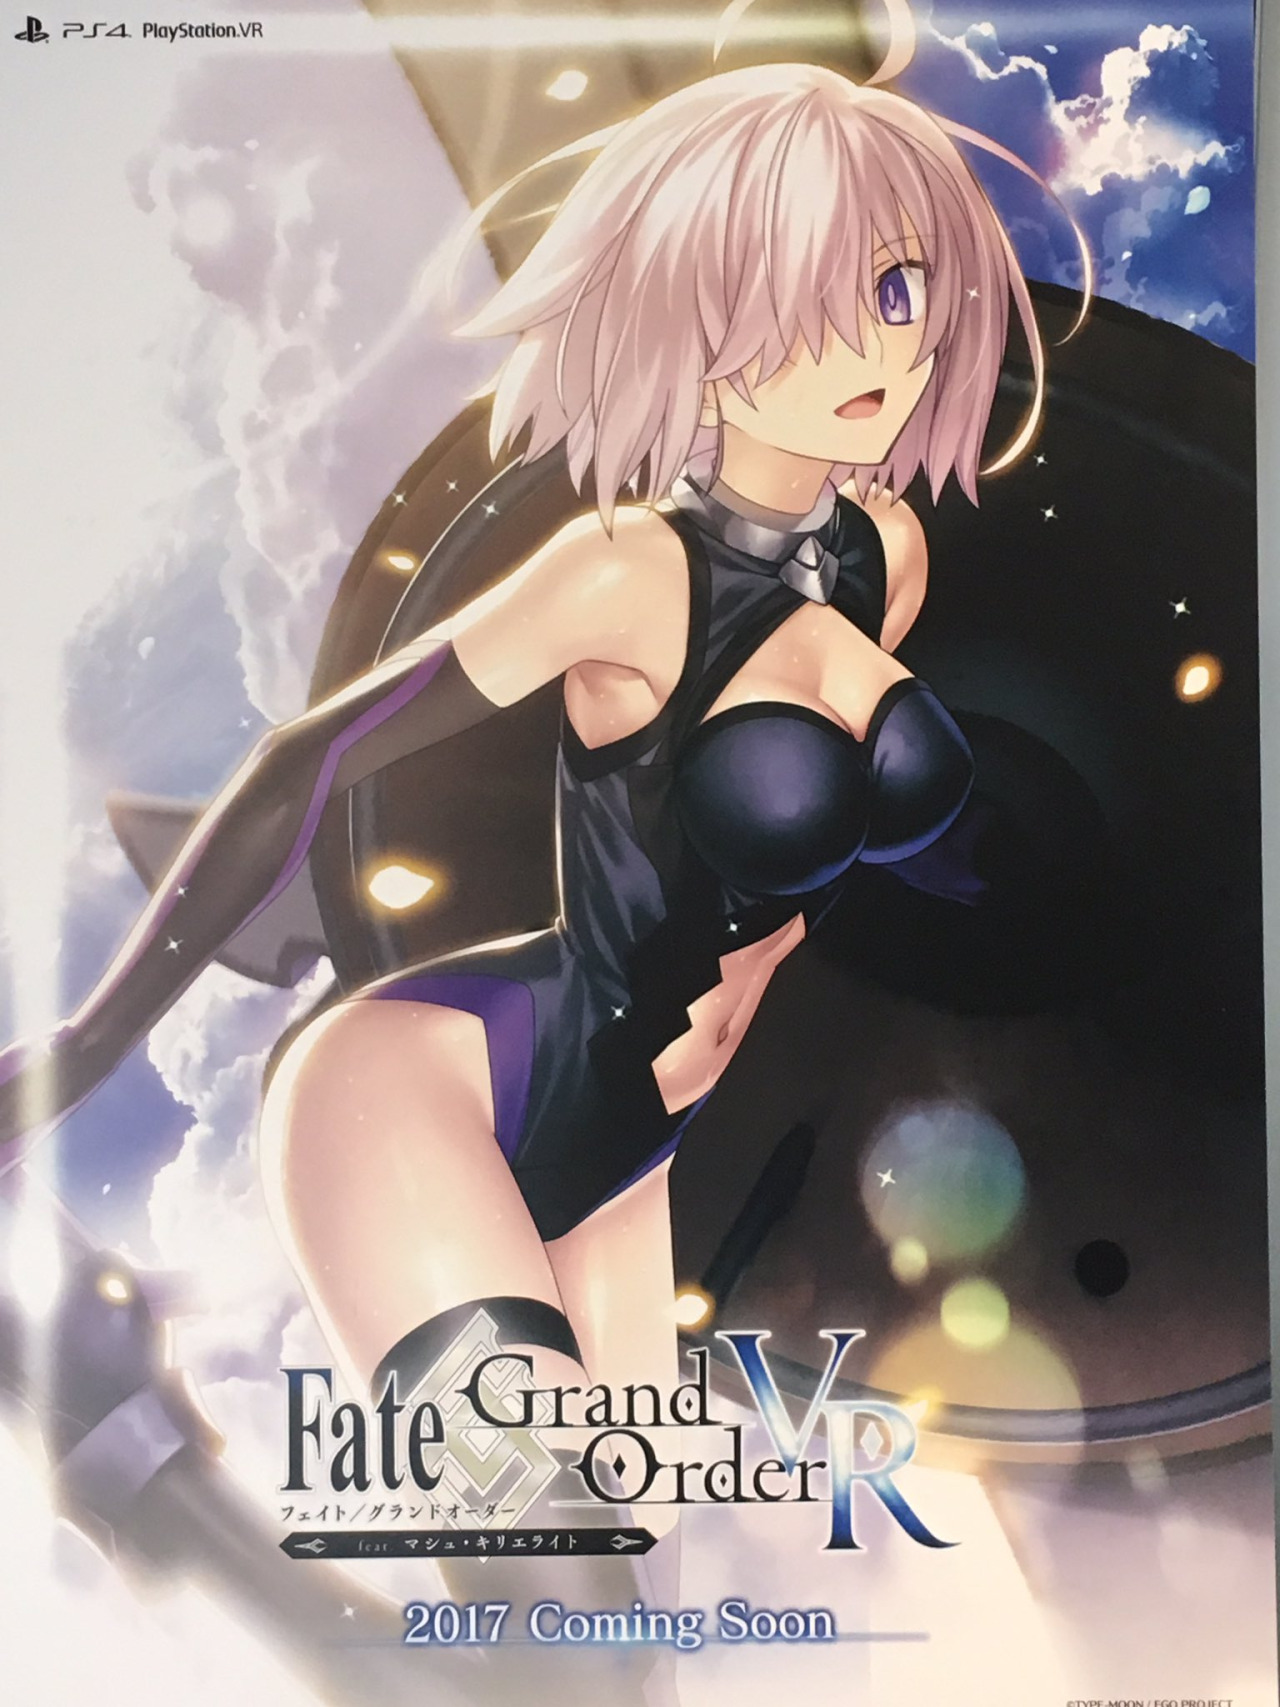 “Fate/Grand Order VR feat. Mashu Kyrielight” reklame video (PS4)